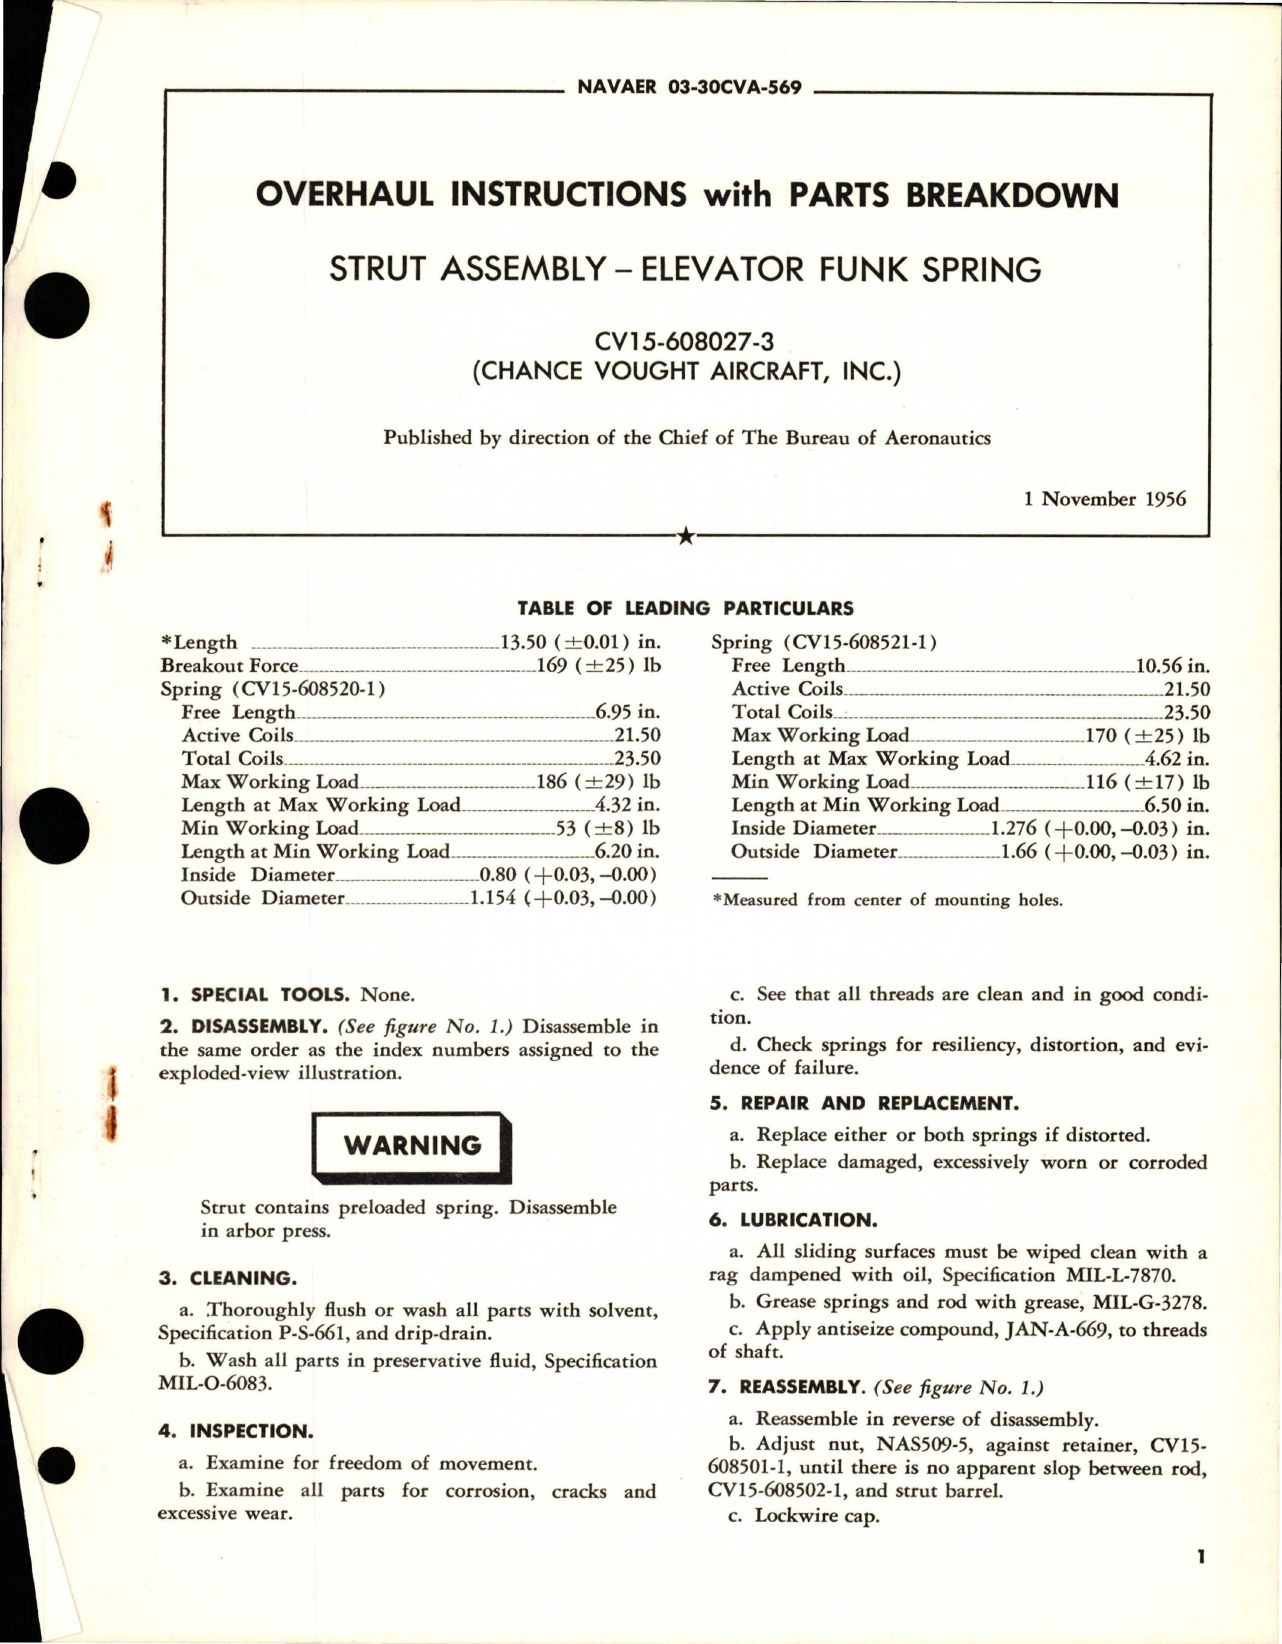 Sample page 1 from AirCorps Library document: Overhaul Instructions with Parts Breakdown for Elevator Funk Spring Strut Assembly - CV15-608027-3